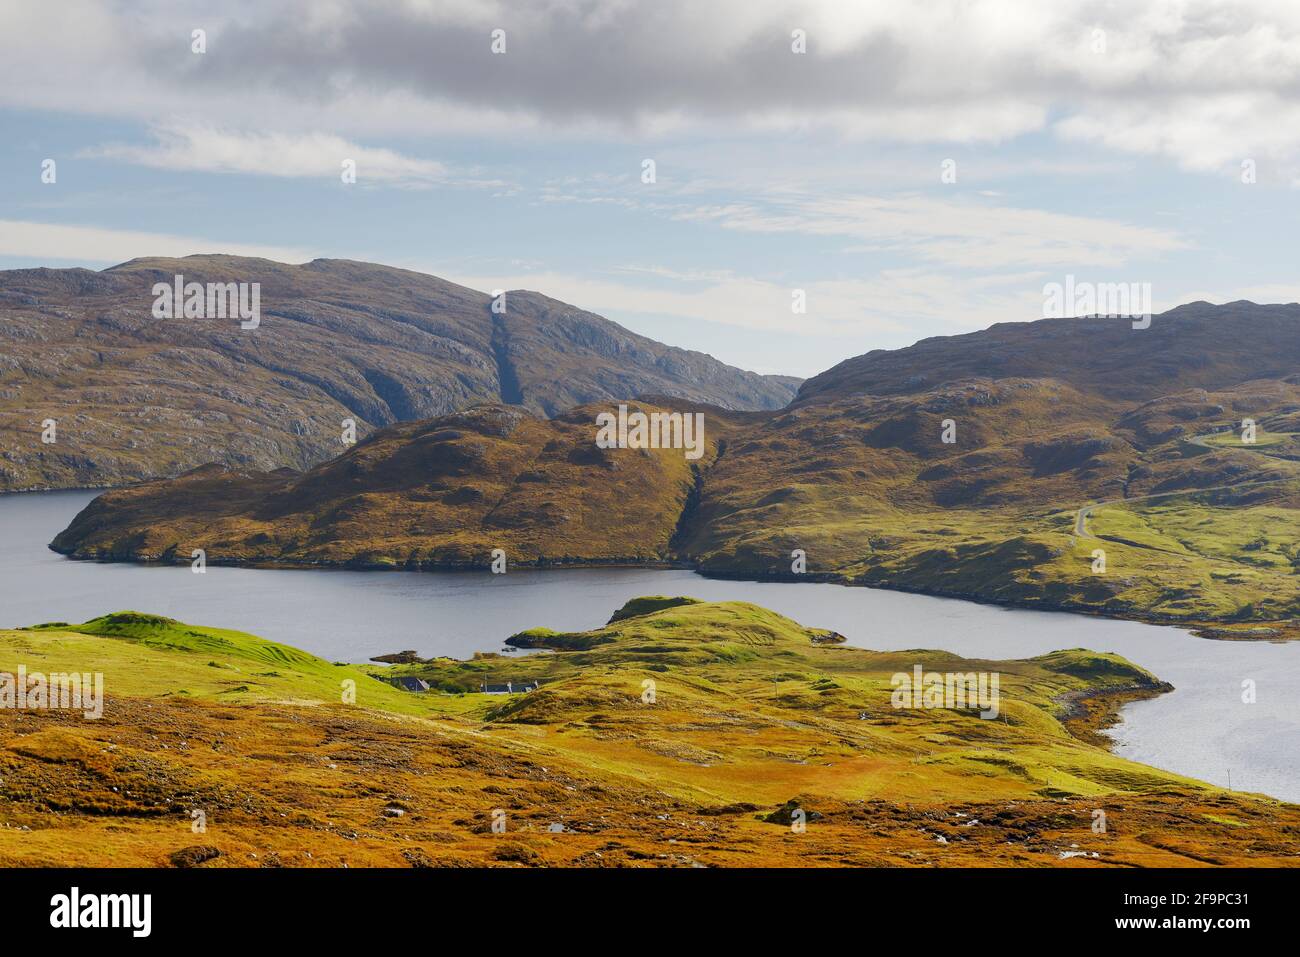 Loch Seaforth, Loch Shiphoirt looking east from above Maraig. Harris, Outer Hebrides, Scotland Stock Photo